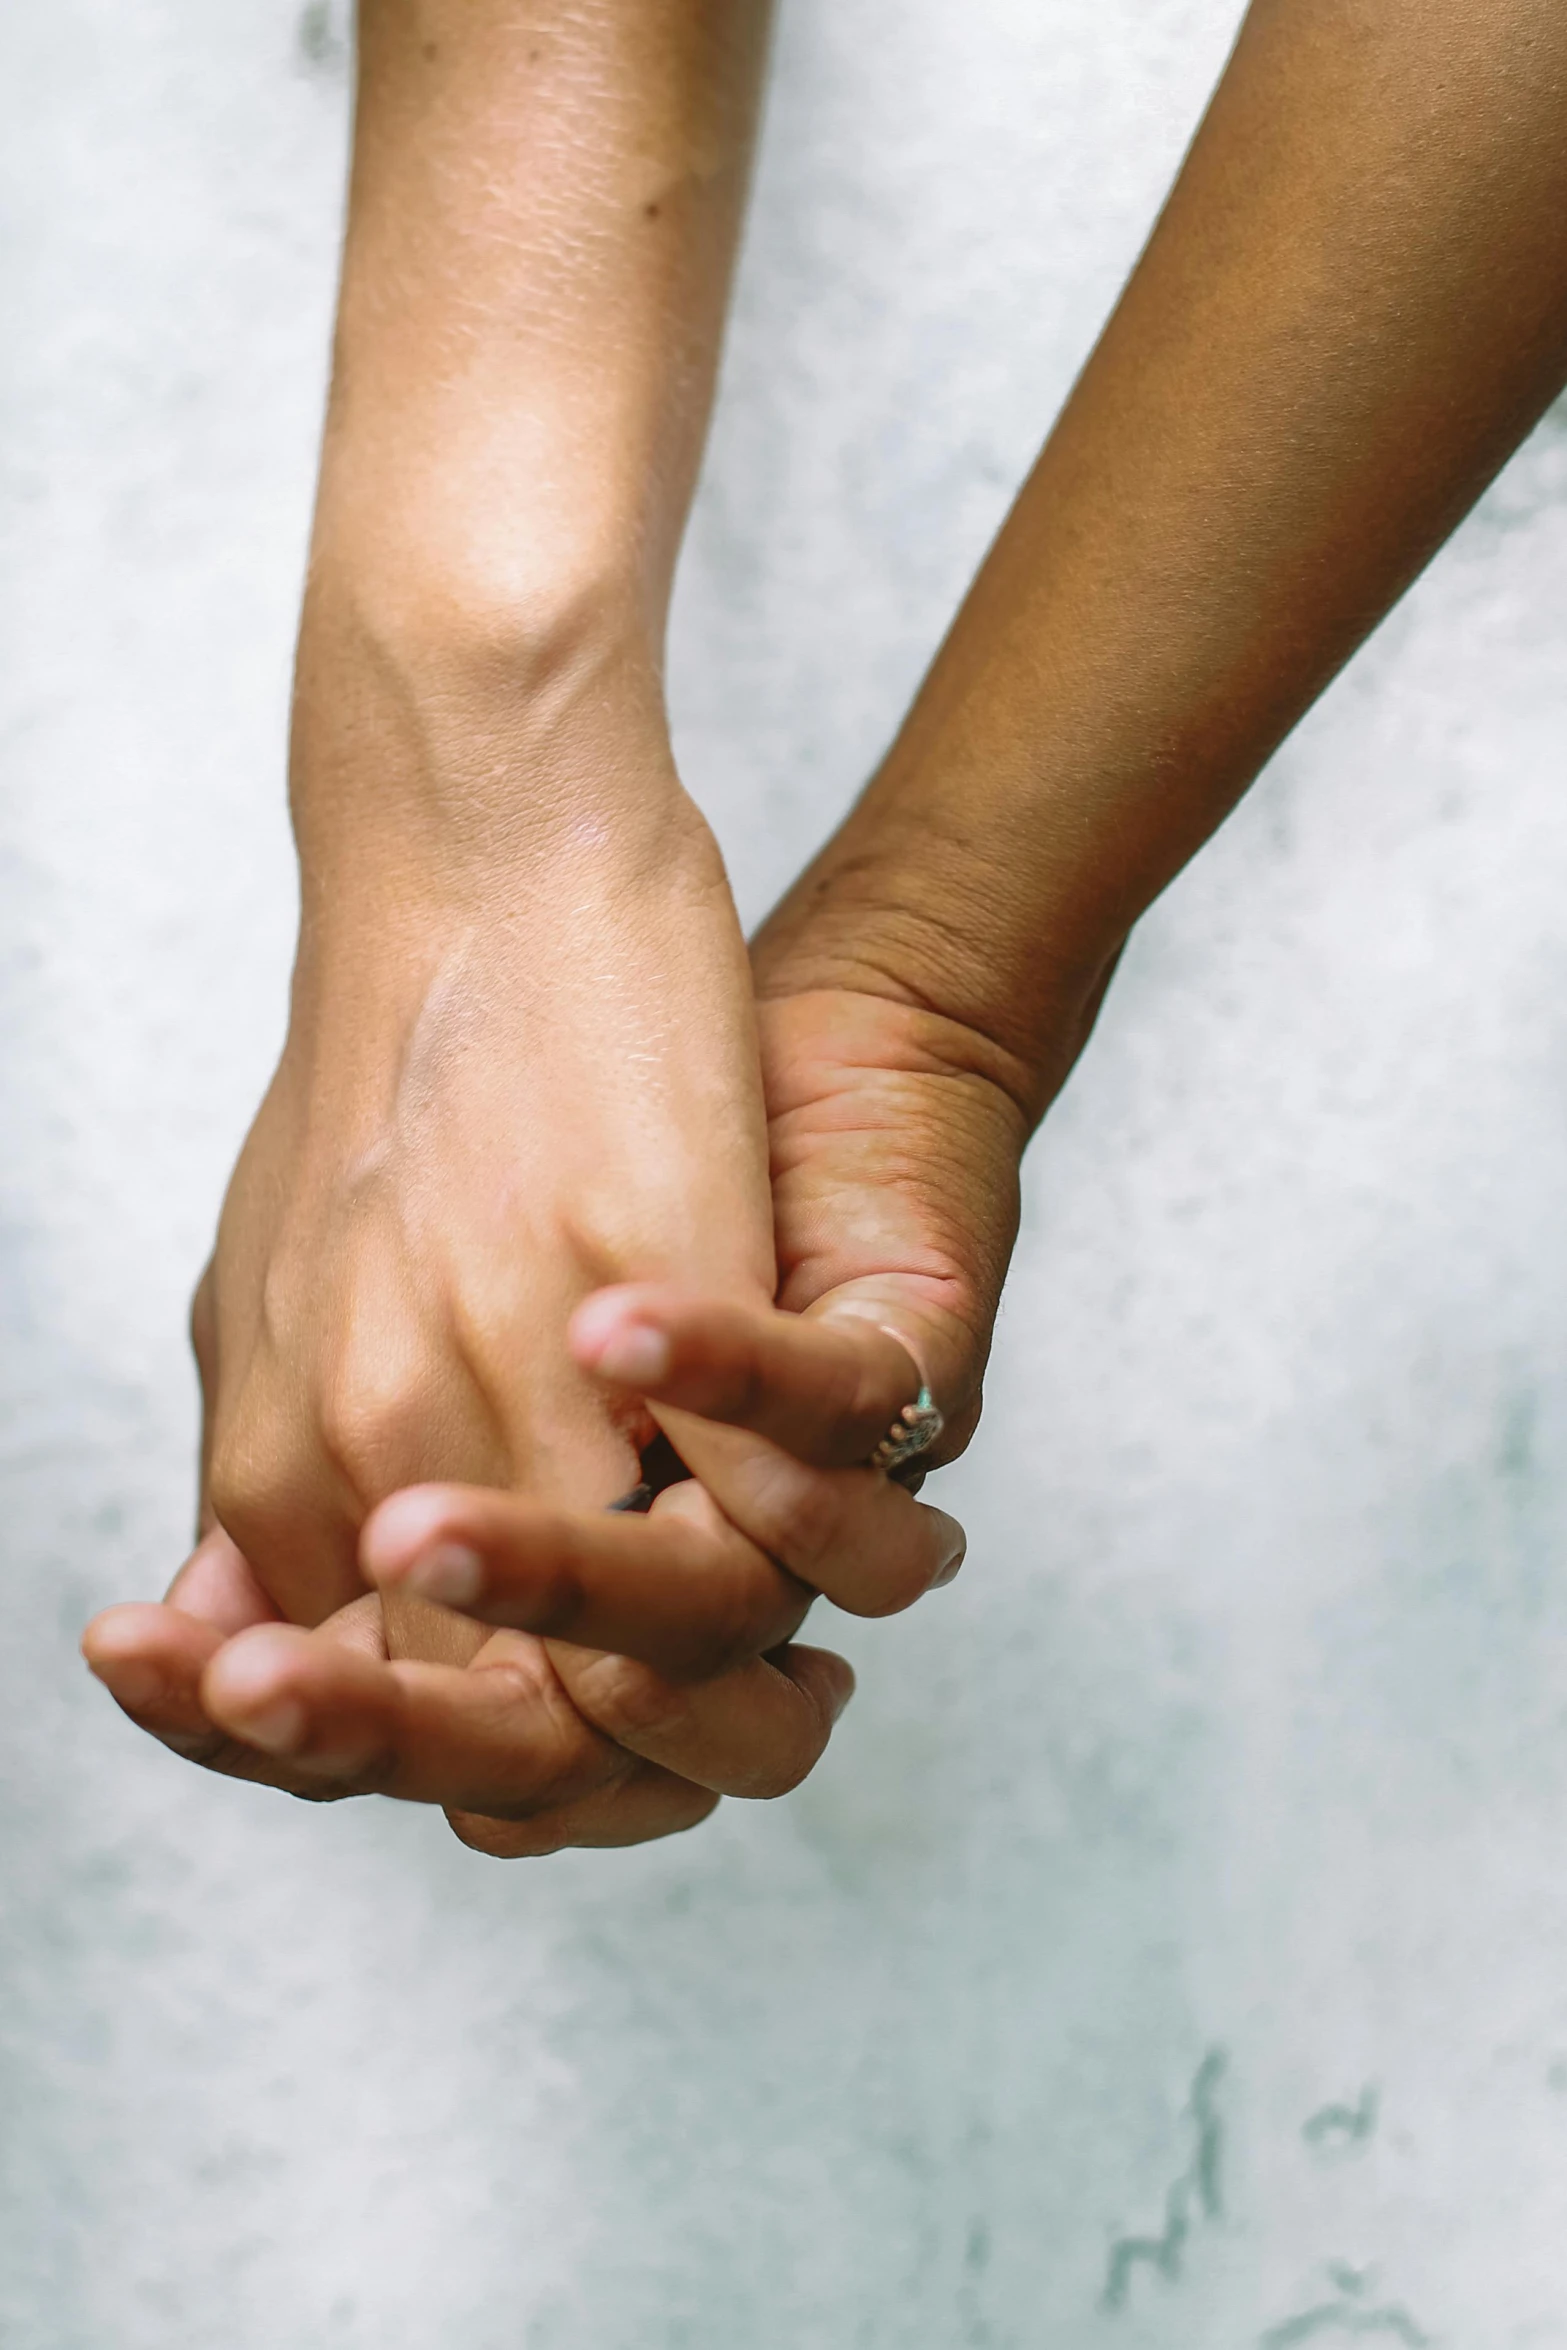 two people holding hands in their left palm